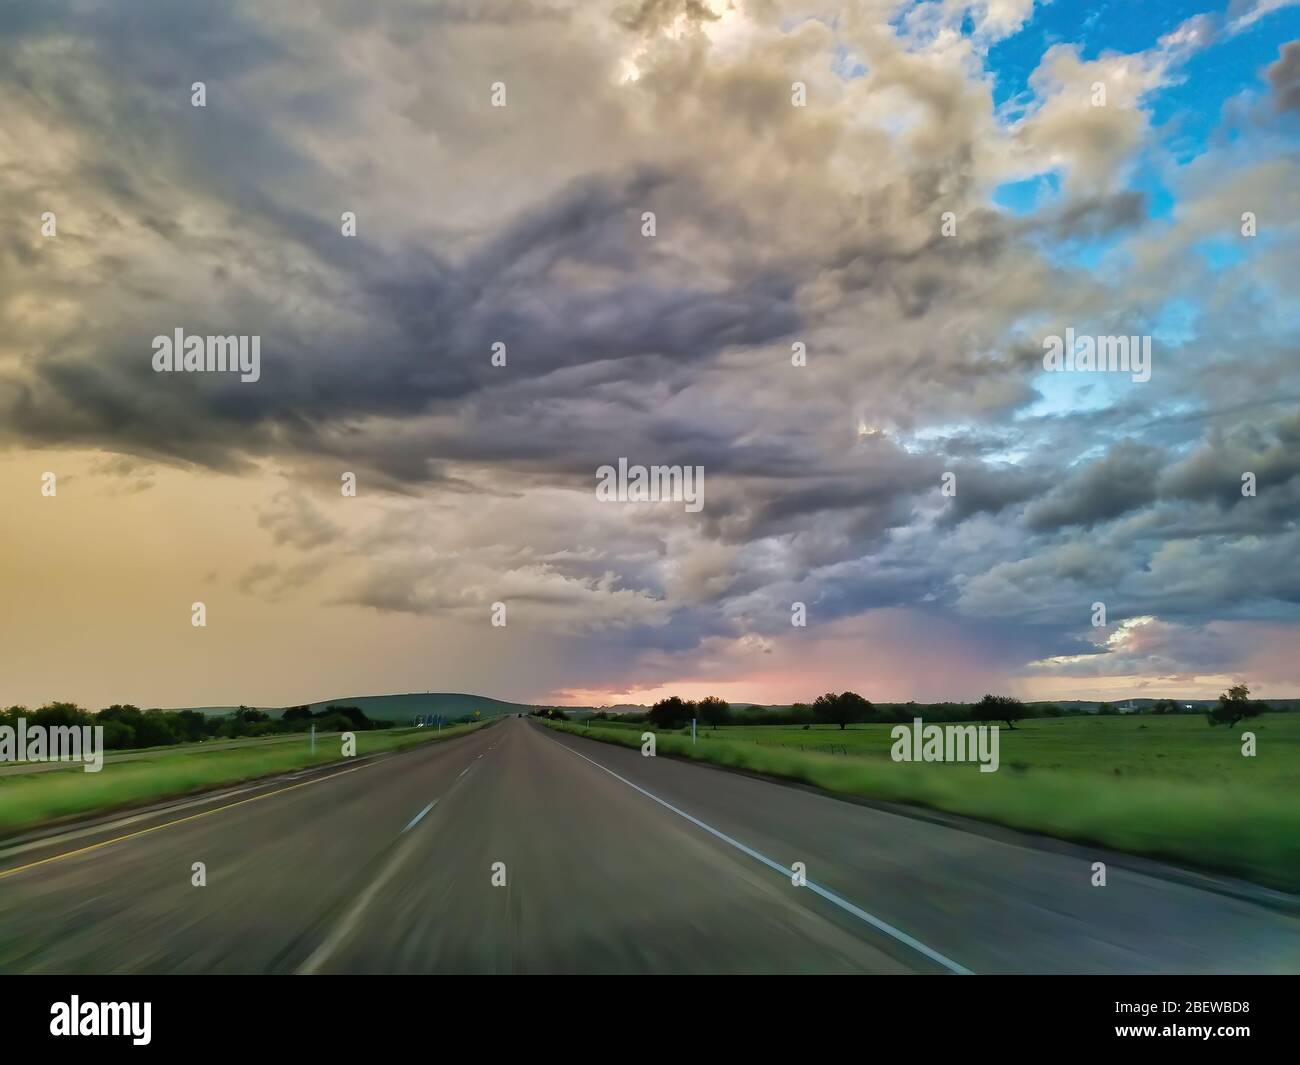 Road from San Antonio, Texas, to Del Rio, Texas, before the storm. Stock Photo